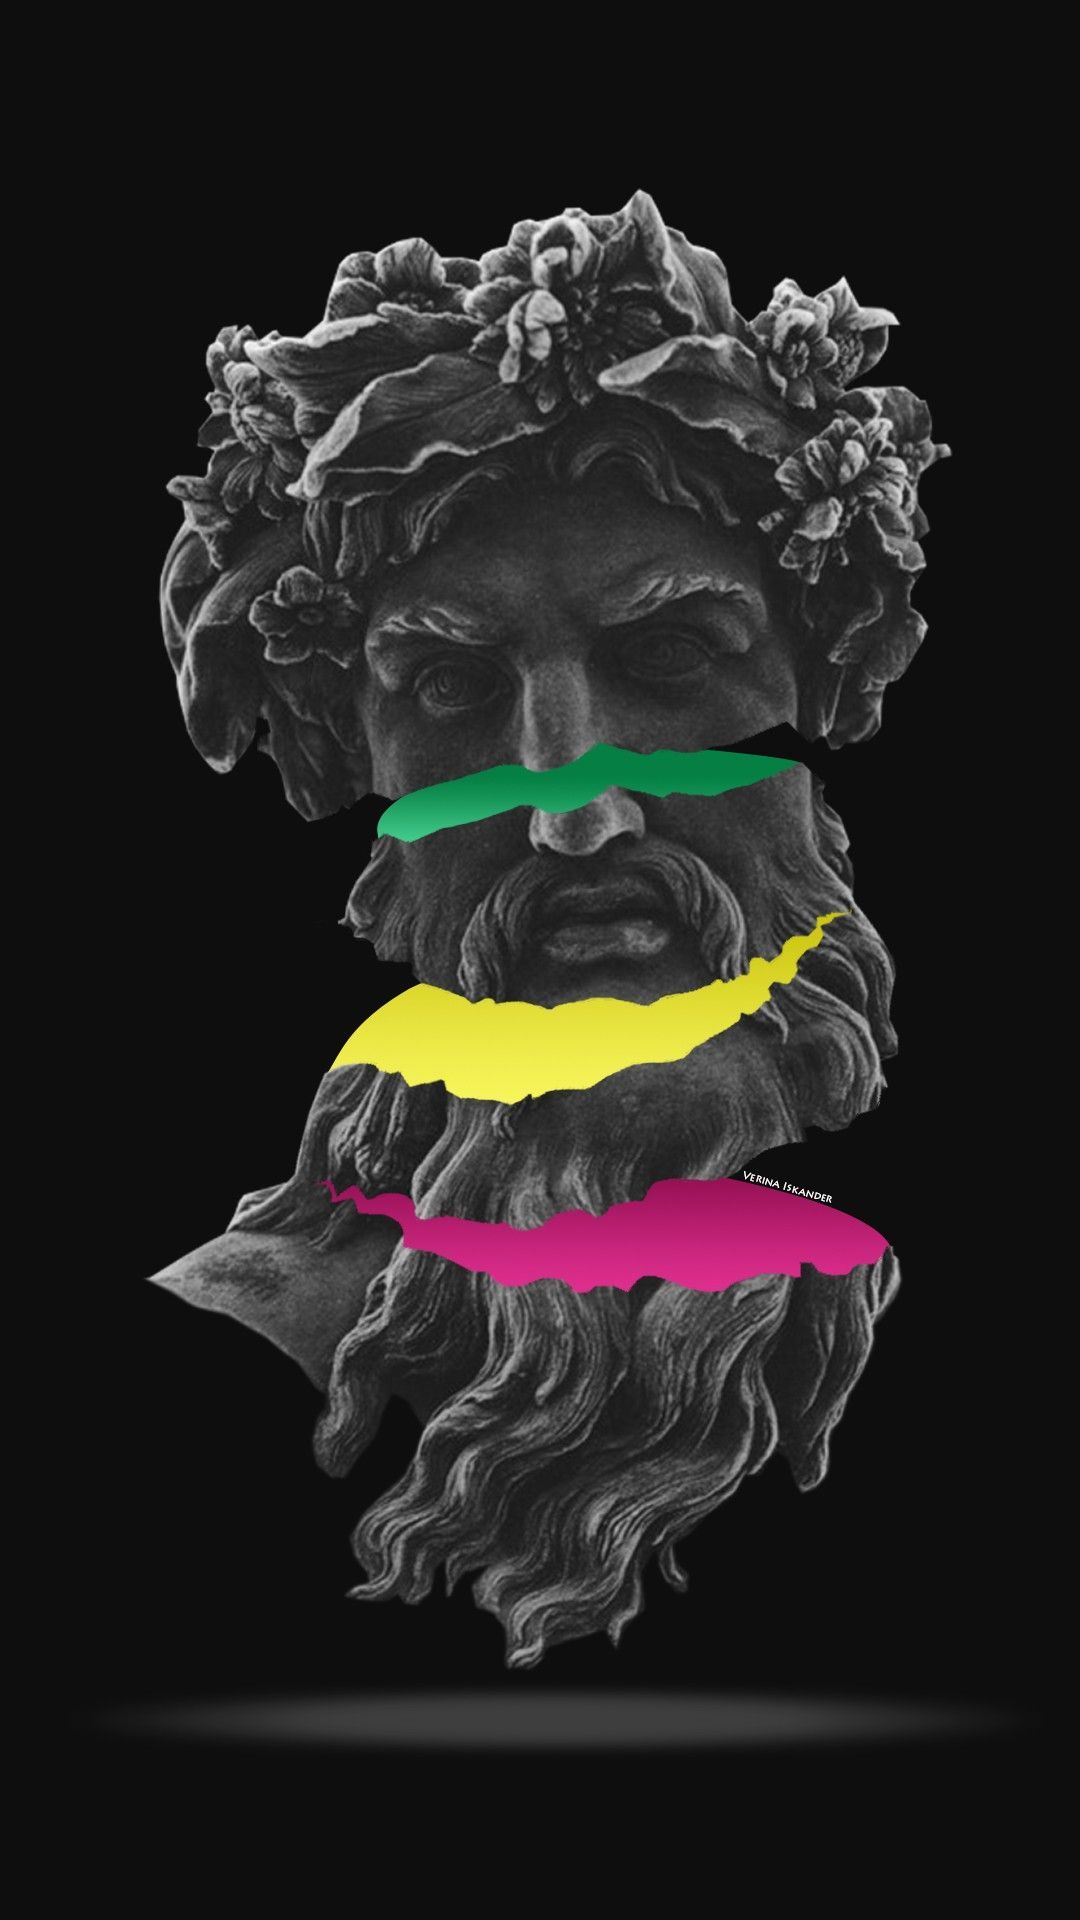 A sculpture of a man's head with a beard and a laurel wreath on a black background. - Neon, Greek mythology